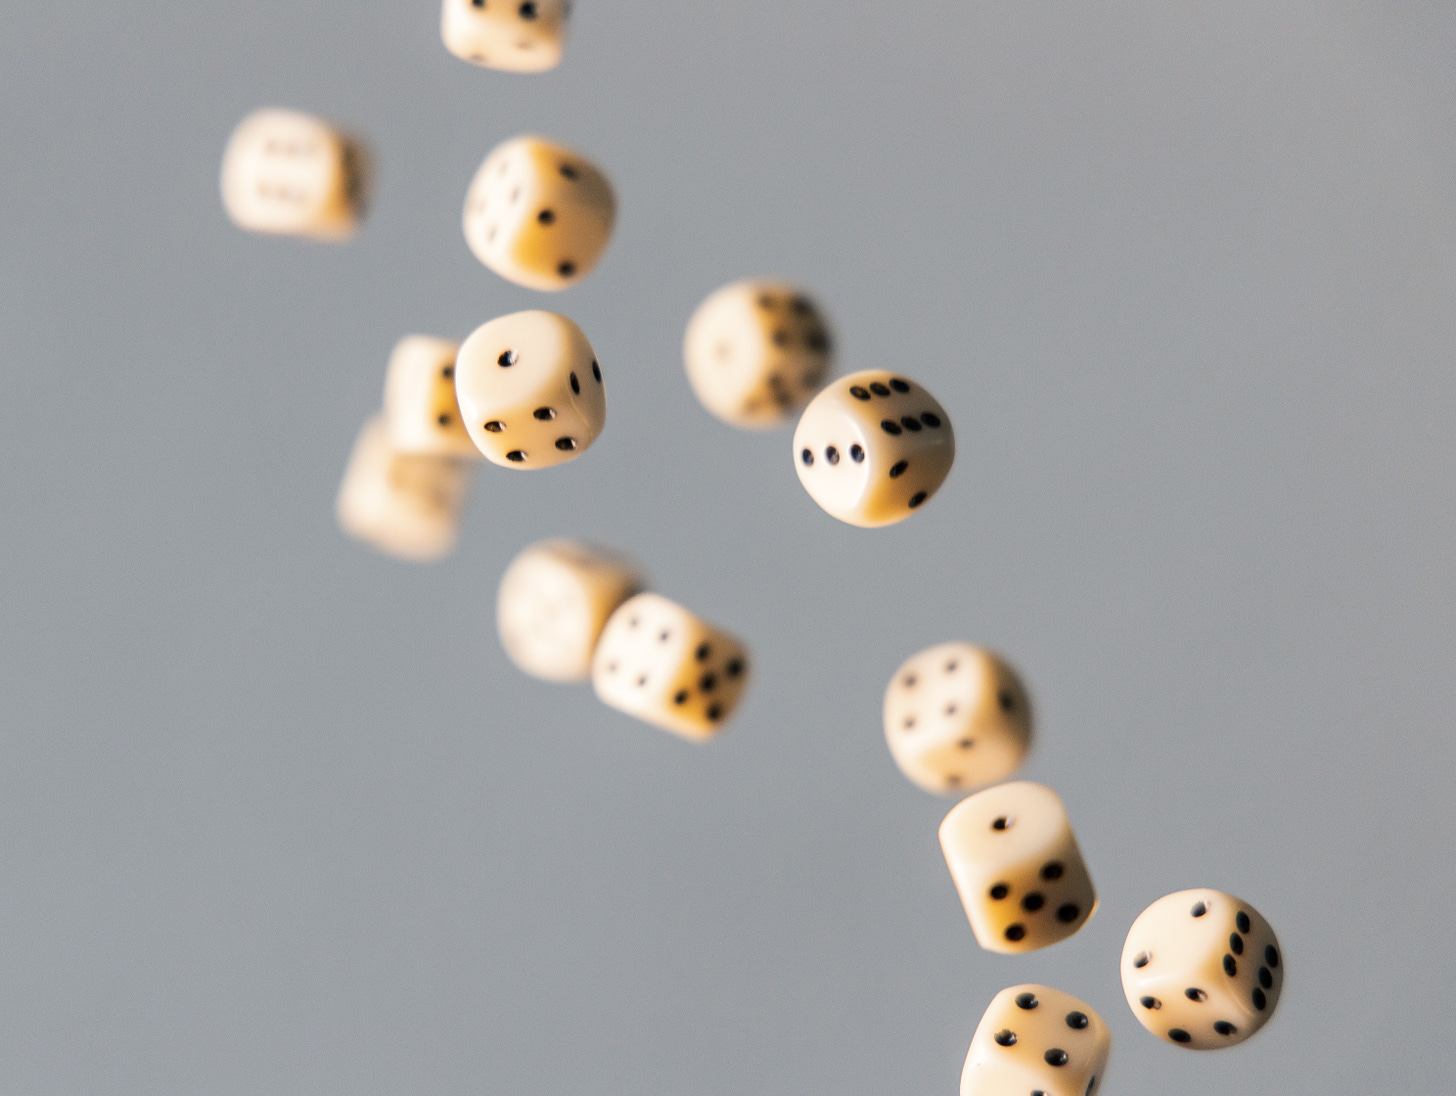 Many dice up in the air